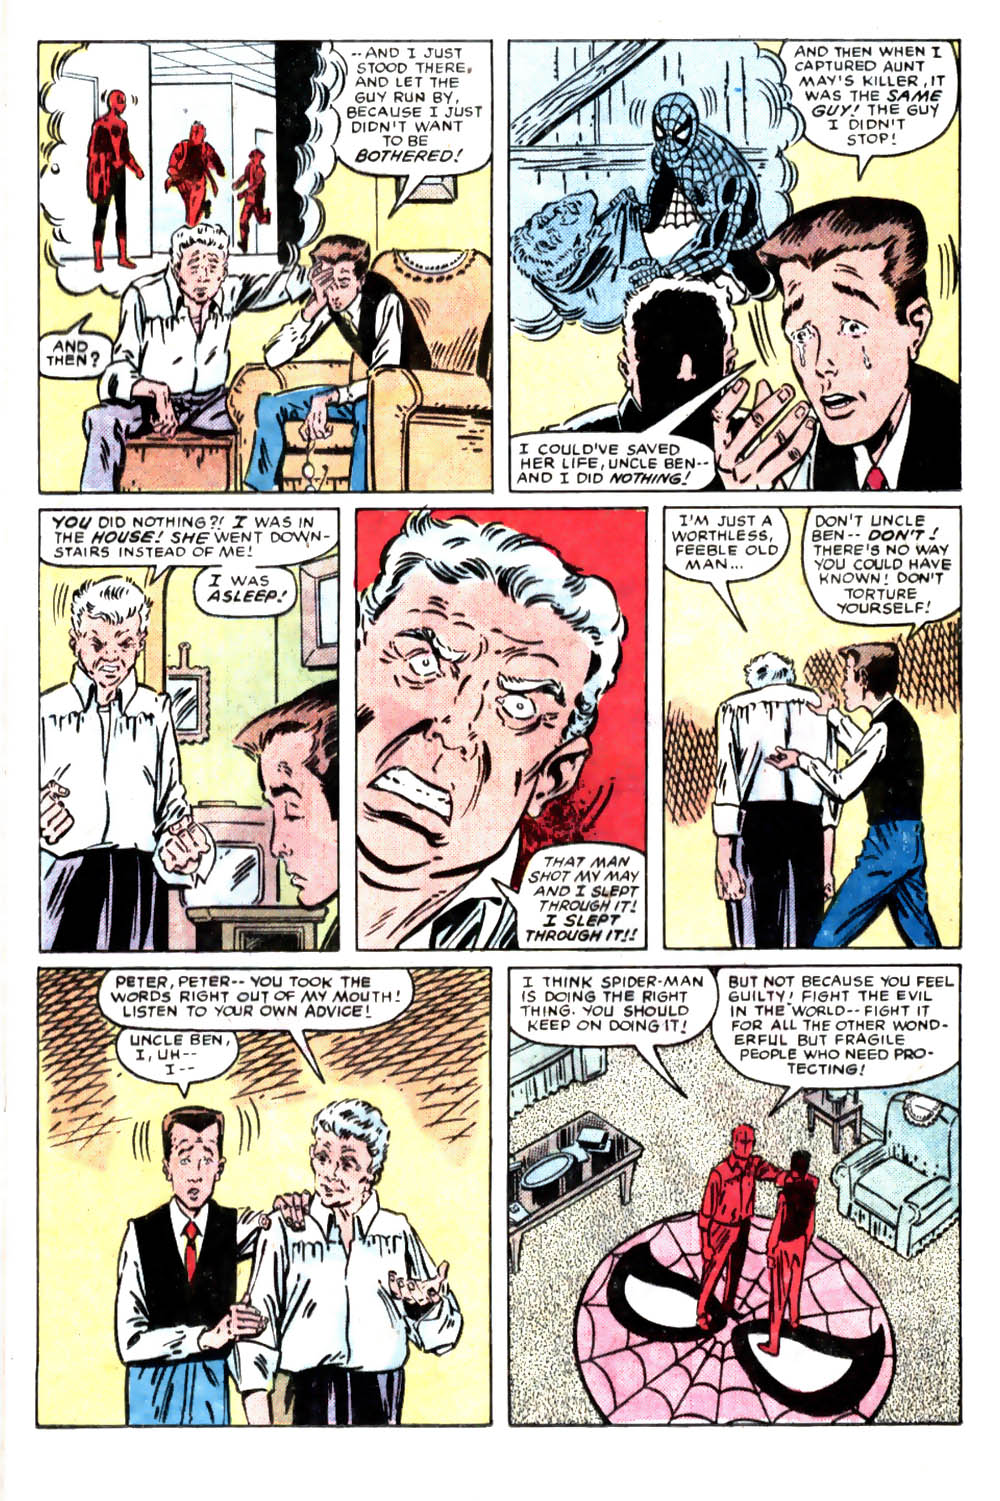 What If? (1977) issue 46 - Spiderman's uncle ben had lived - Page 12